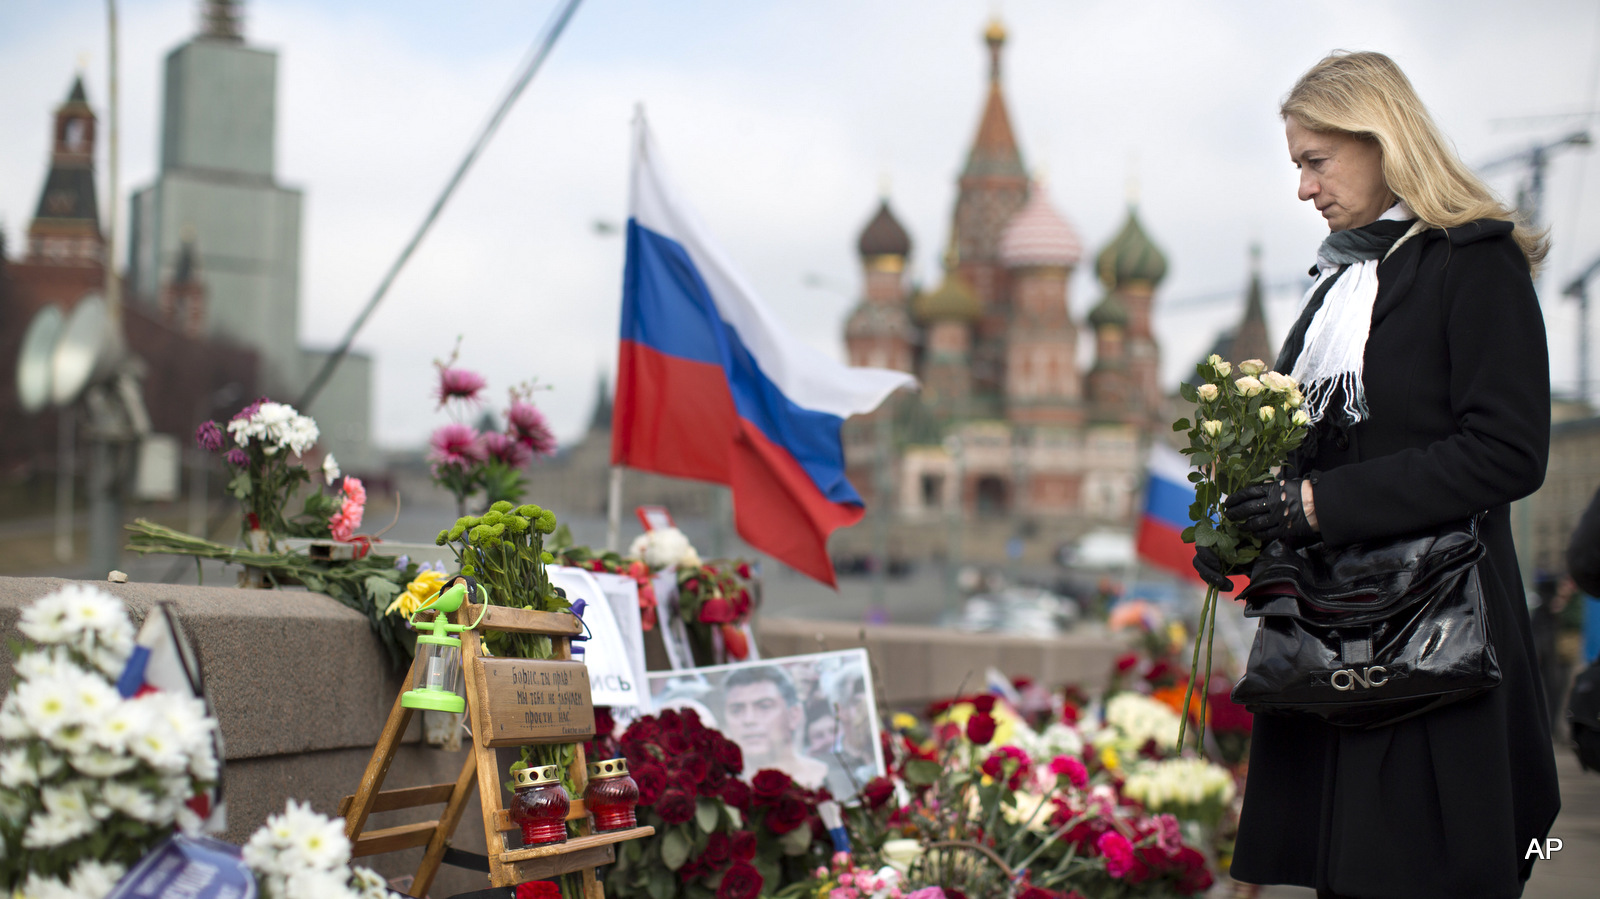 A woman lays a flower tribute at a place where Boris Nemtsov, a charismatic Russian opposition leader and sharp critic of President Vladimir Putin, was gunned down on Feb. 27, 2015 near the Kremlin in Moscow, Russia, Tuesday, April 7, 2015. Supporters of Russian opposition politician Boris Nemtsov gathered at a Moscow bridge where he was gunned down Feb. 27 to commemorate 40 days since his death, a special day in the Orthodox Christian tradition.